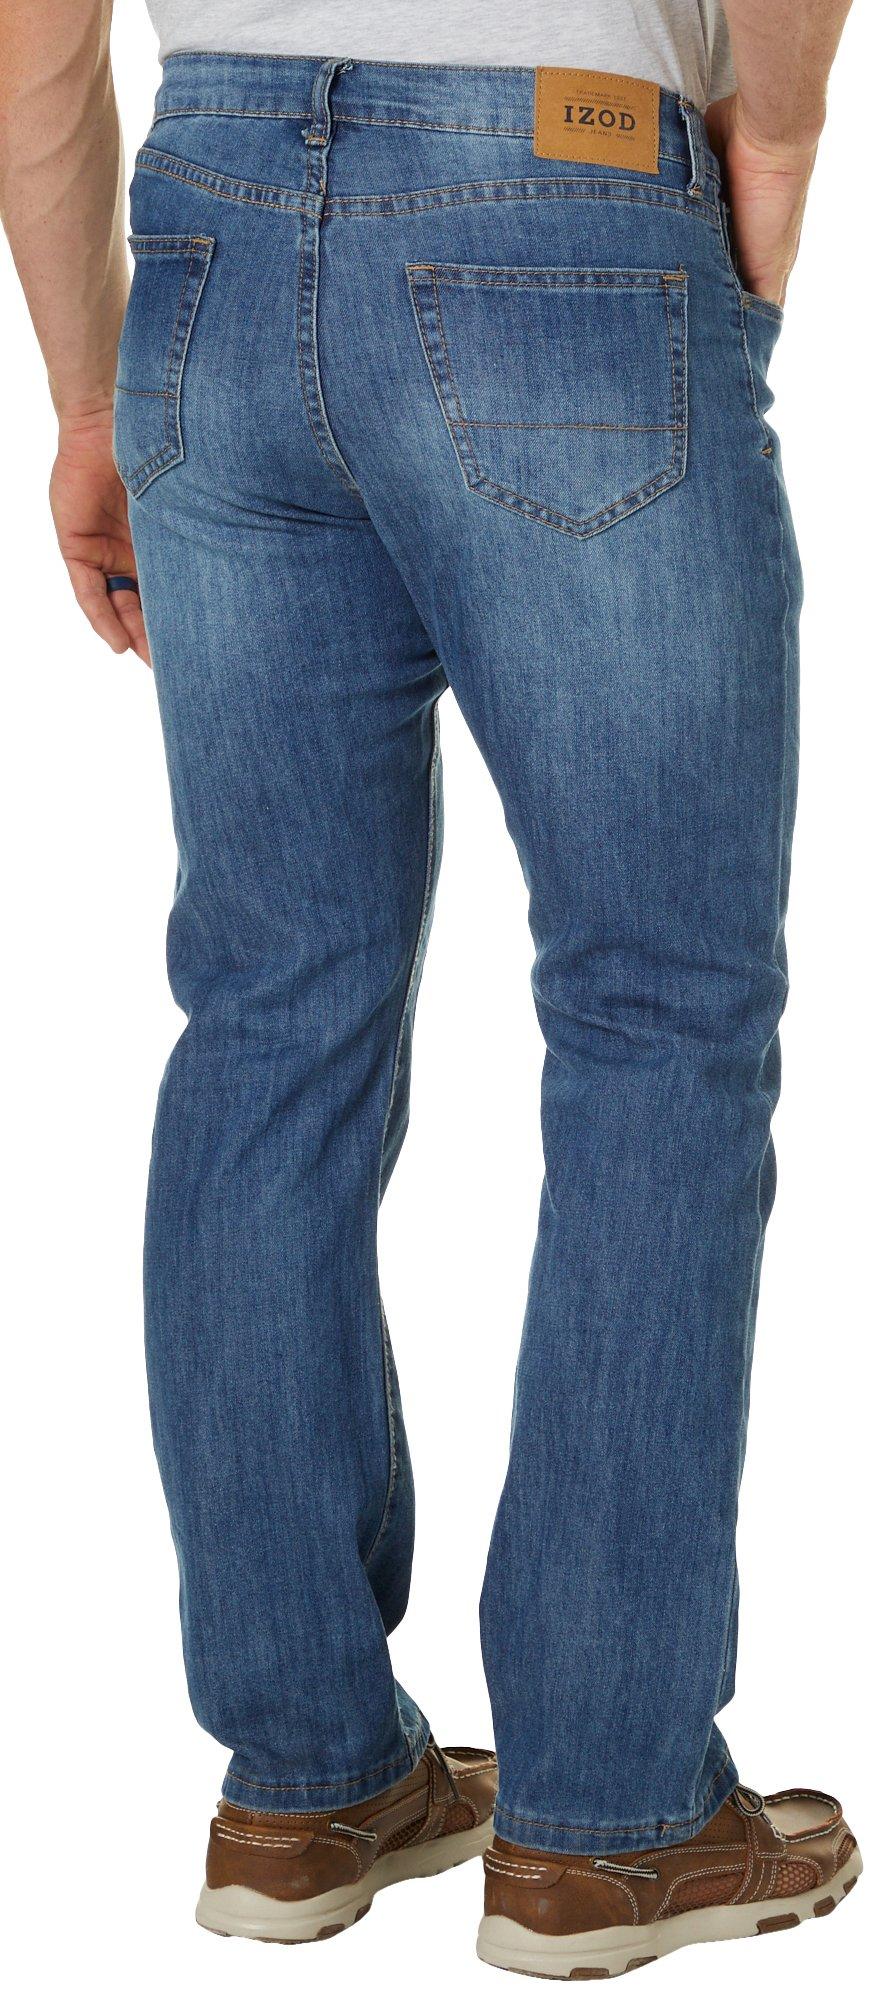 izod men's comfort stretch relaxed fit jean